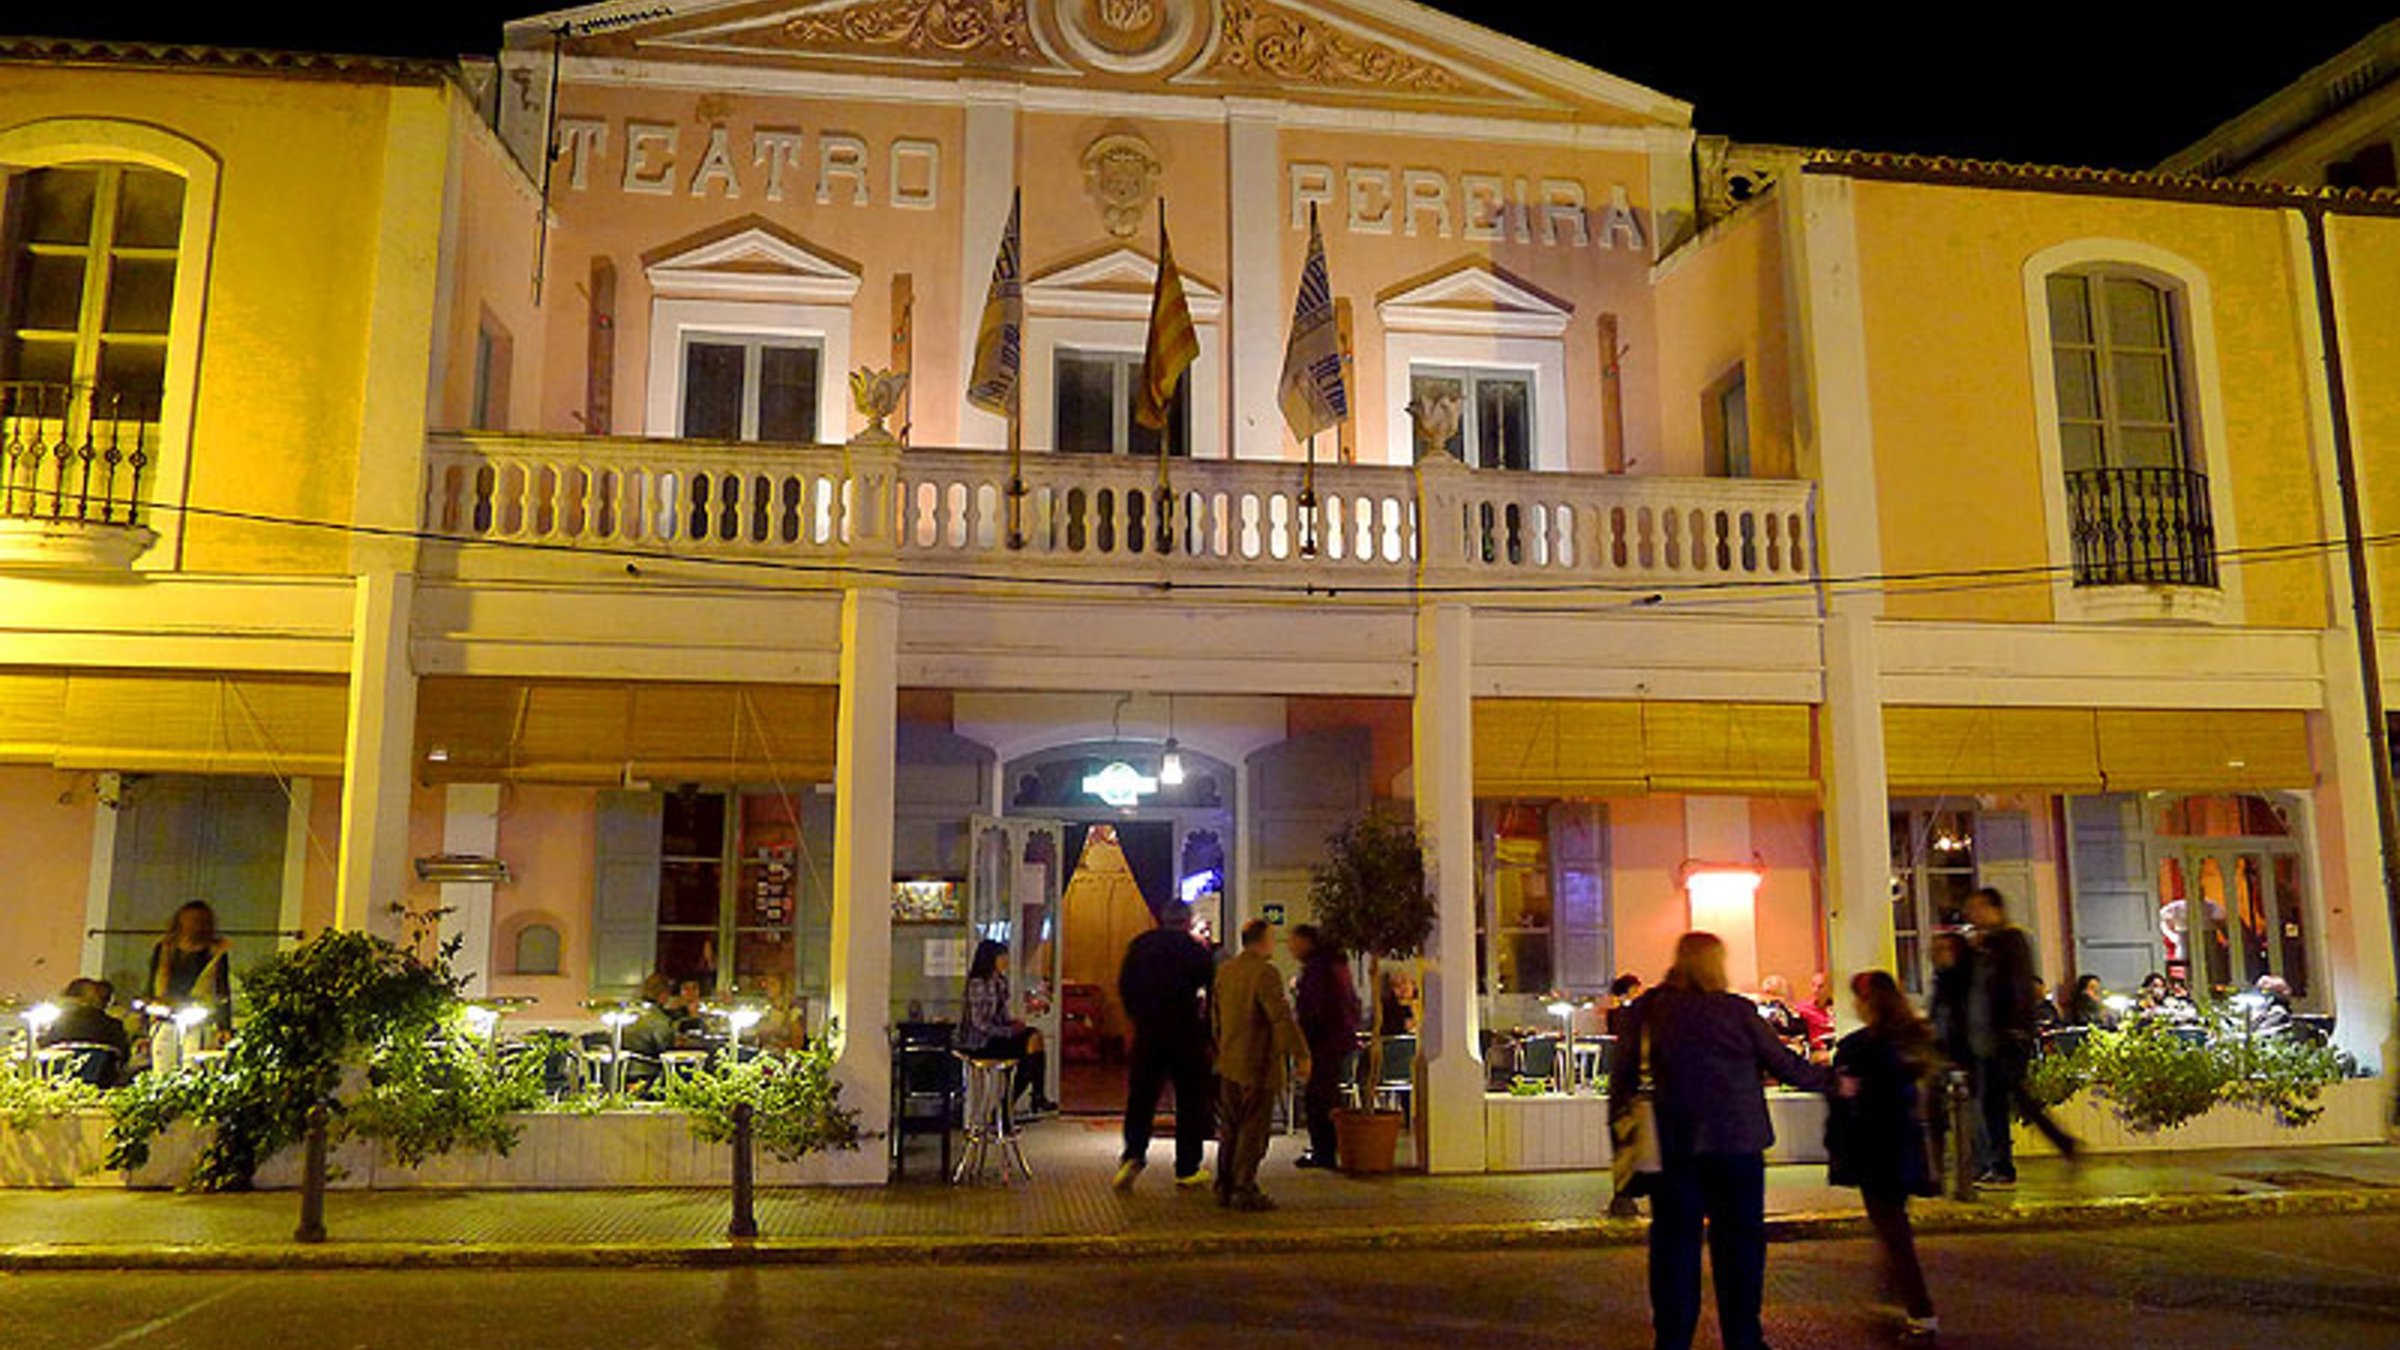 People Around The Theatre At Night